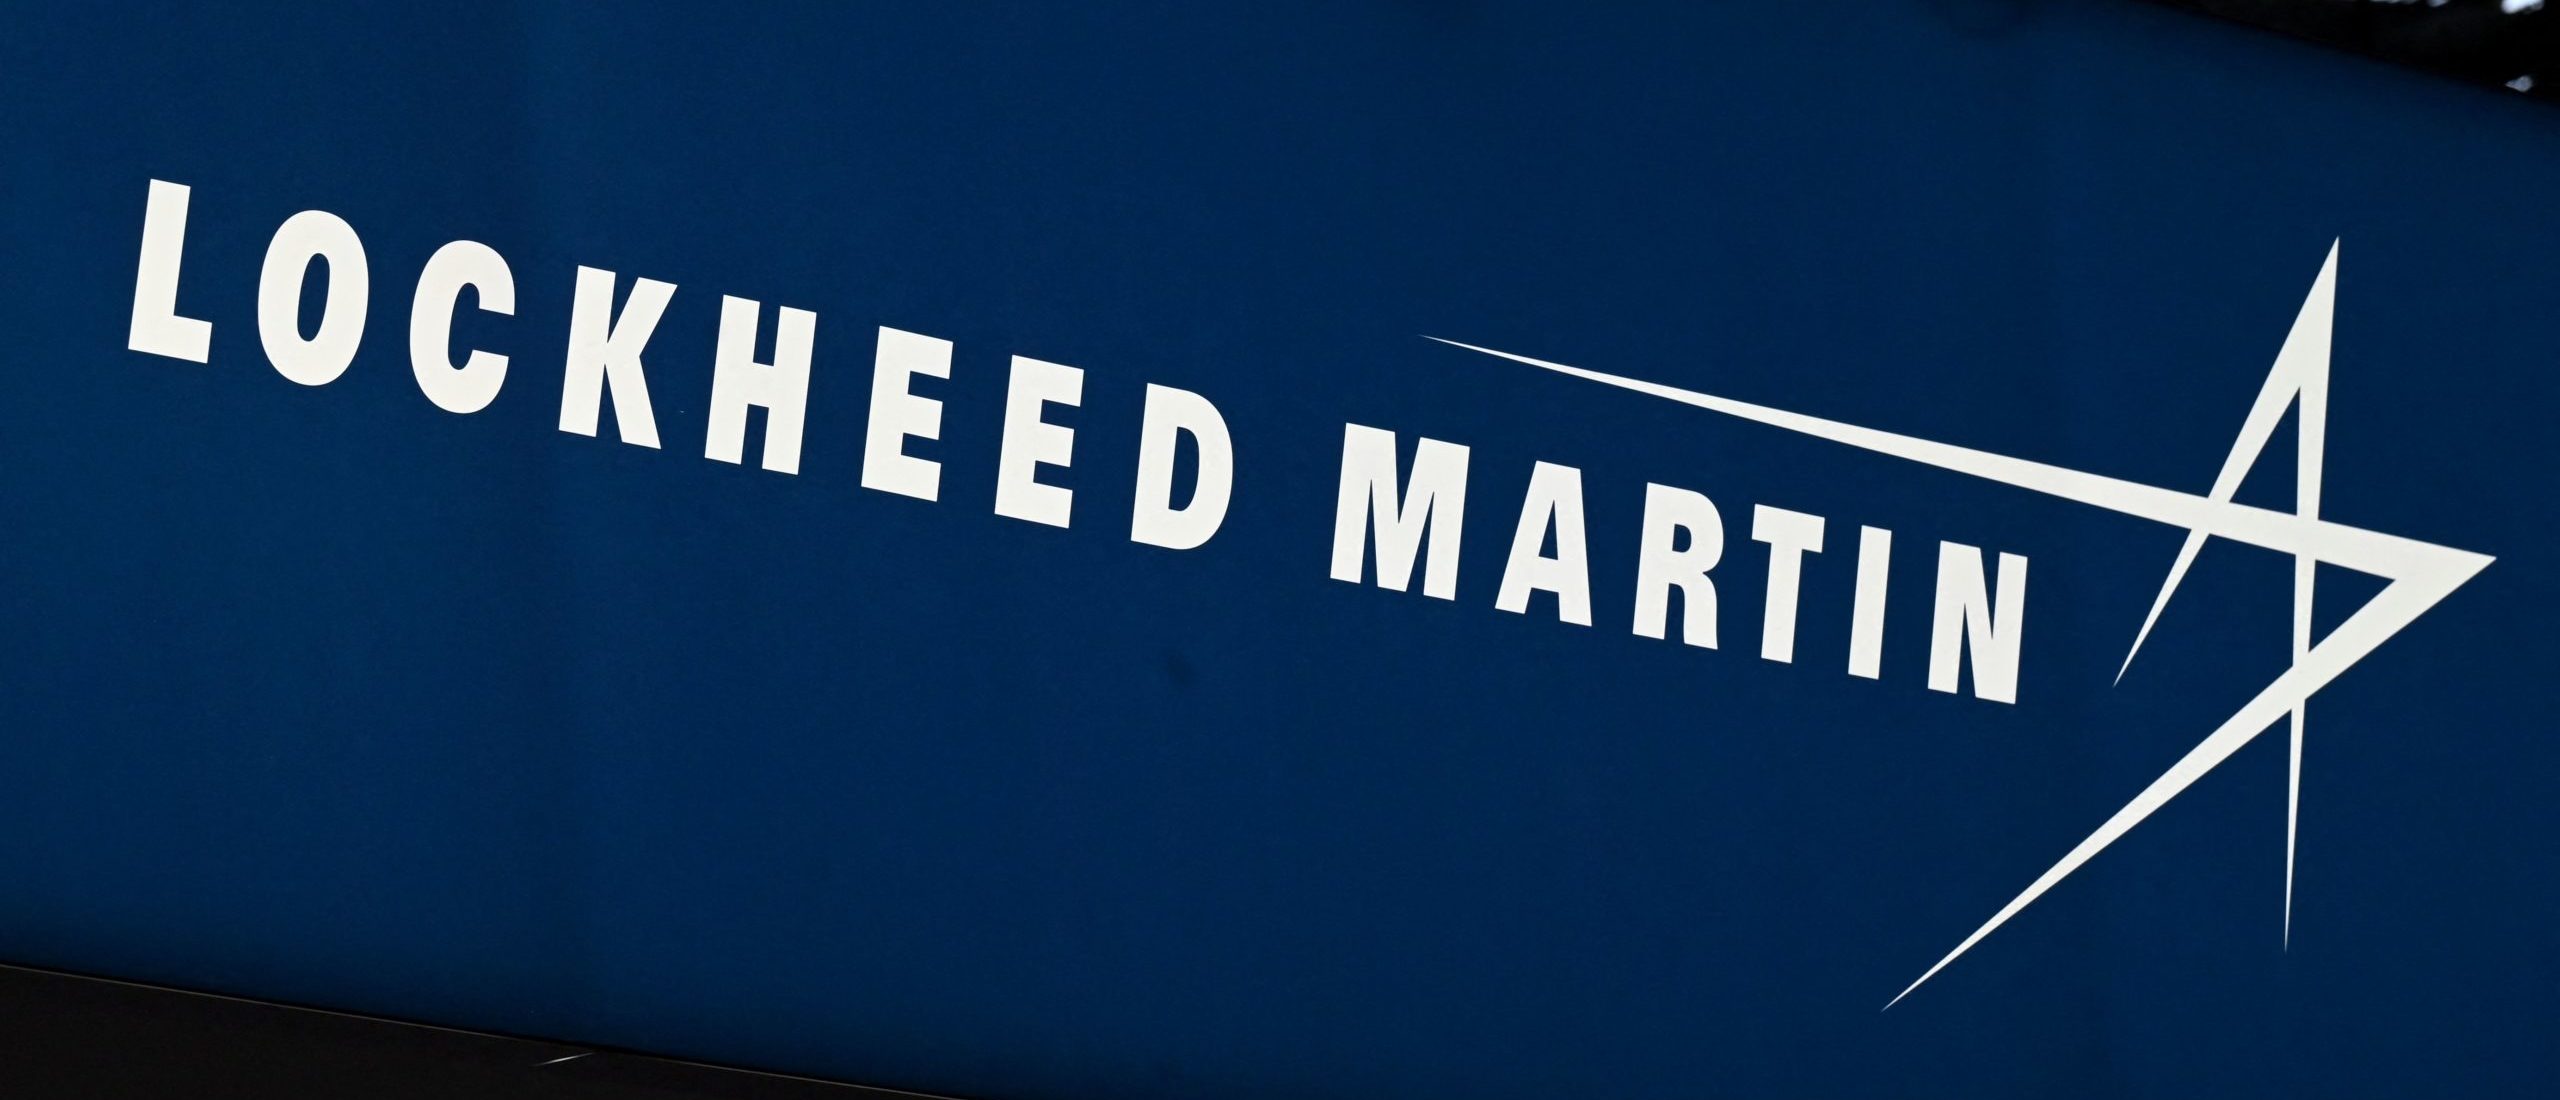 This photograph taken on June 13, 2022, shows the logo from US defence manufacturer Lockheed Martin on display at the Eurosatory international land and airland defence and security trade fair, in Villepinte, a northern suburb of Paris. (Photo by EMMANUEL DUNAND/AFP via Getty Images)